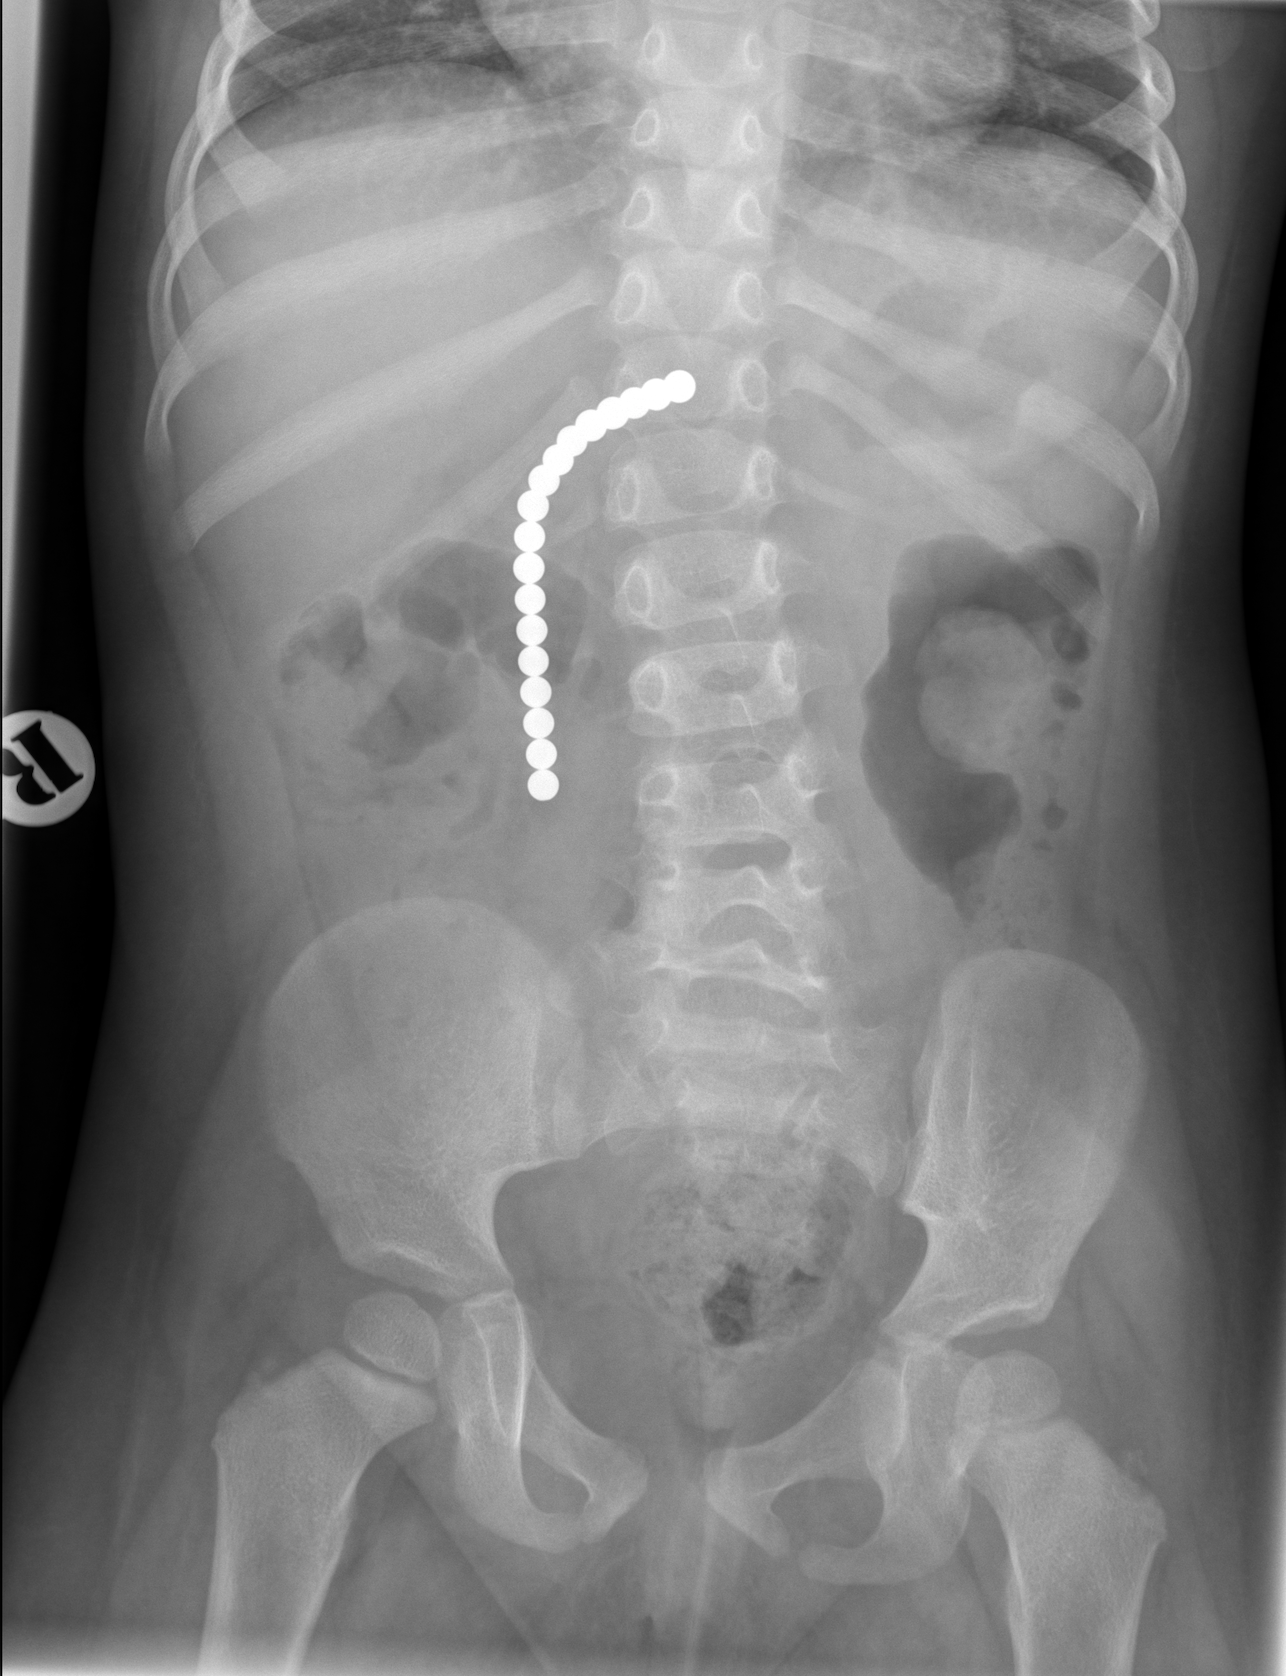 x-ray of ingested magnets